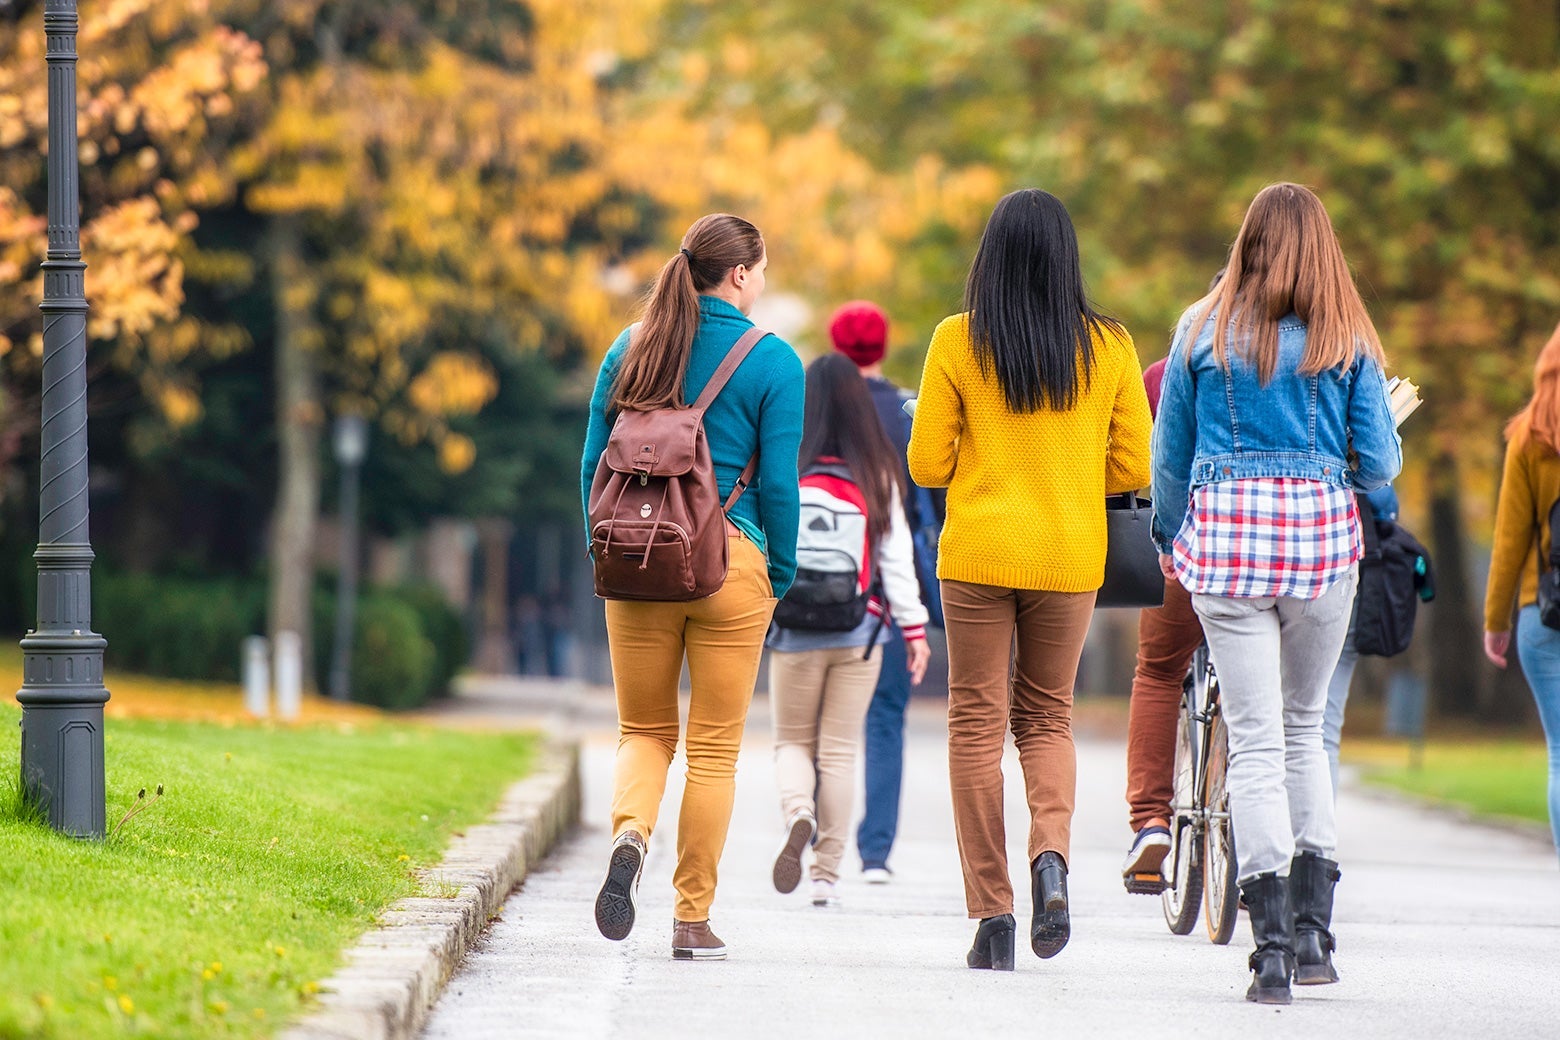 A group of young women walk away down a path on a college campus.